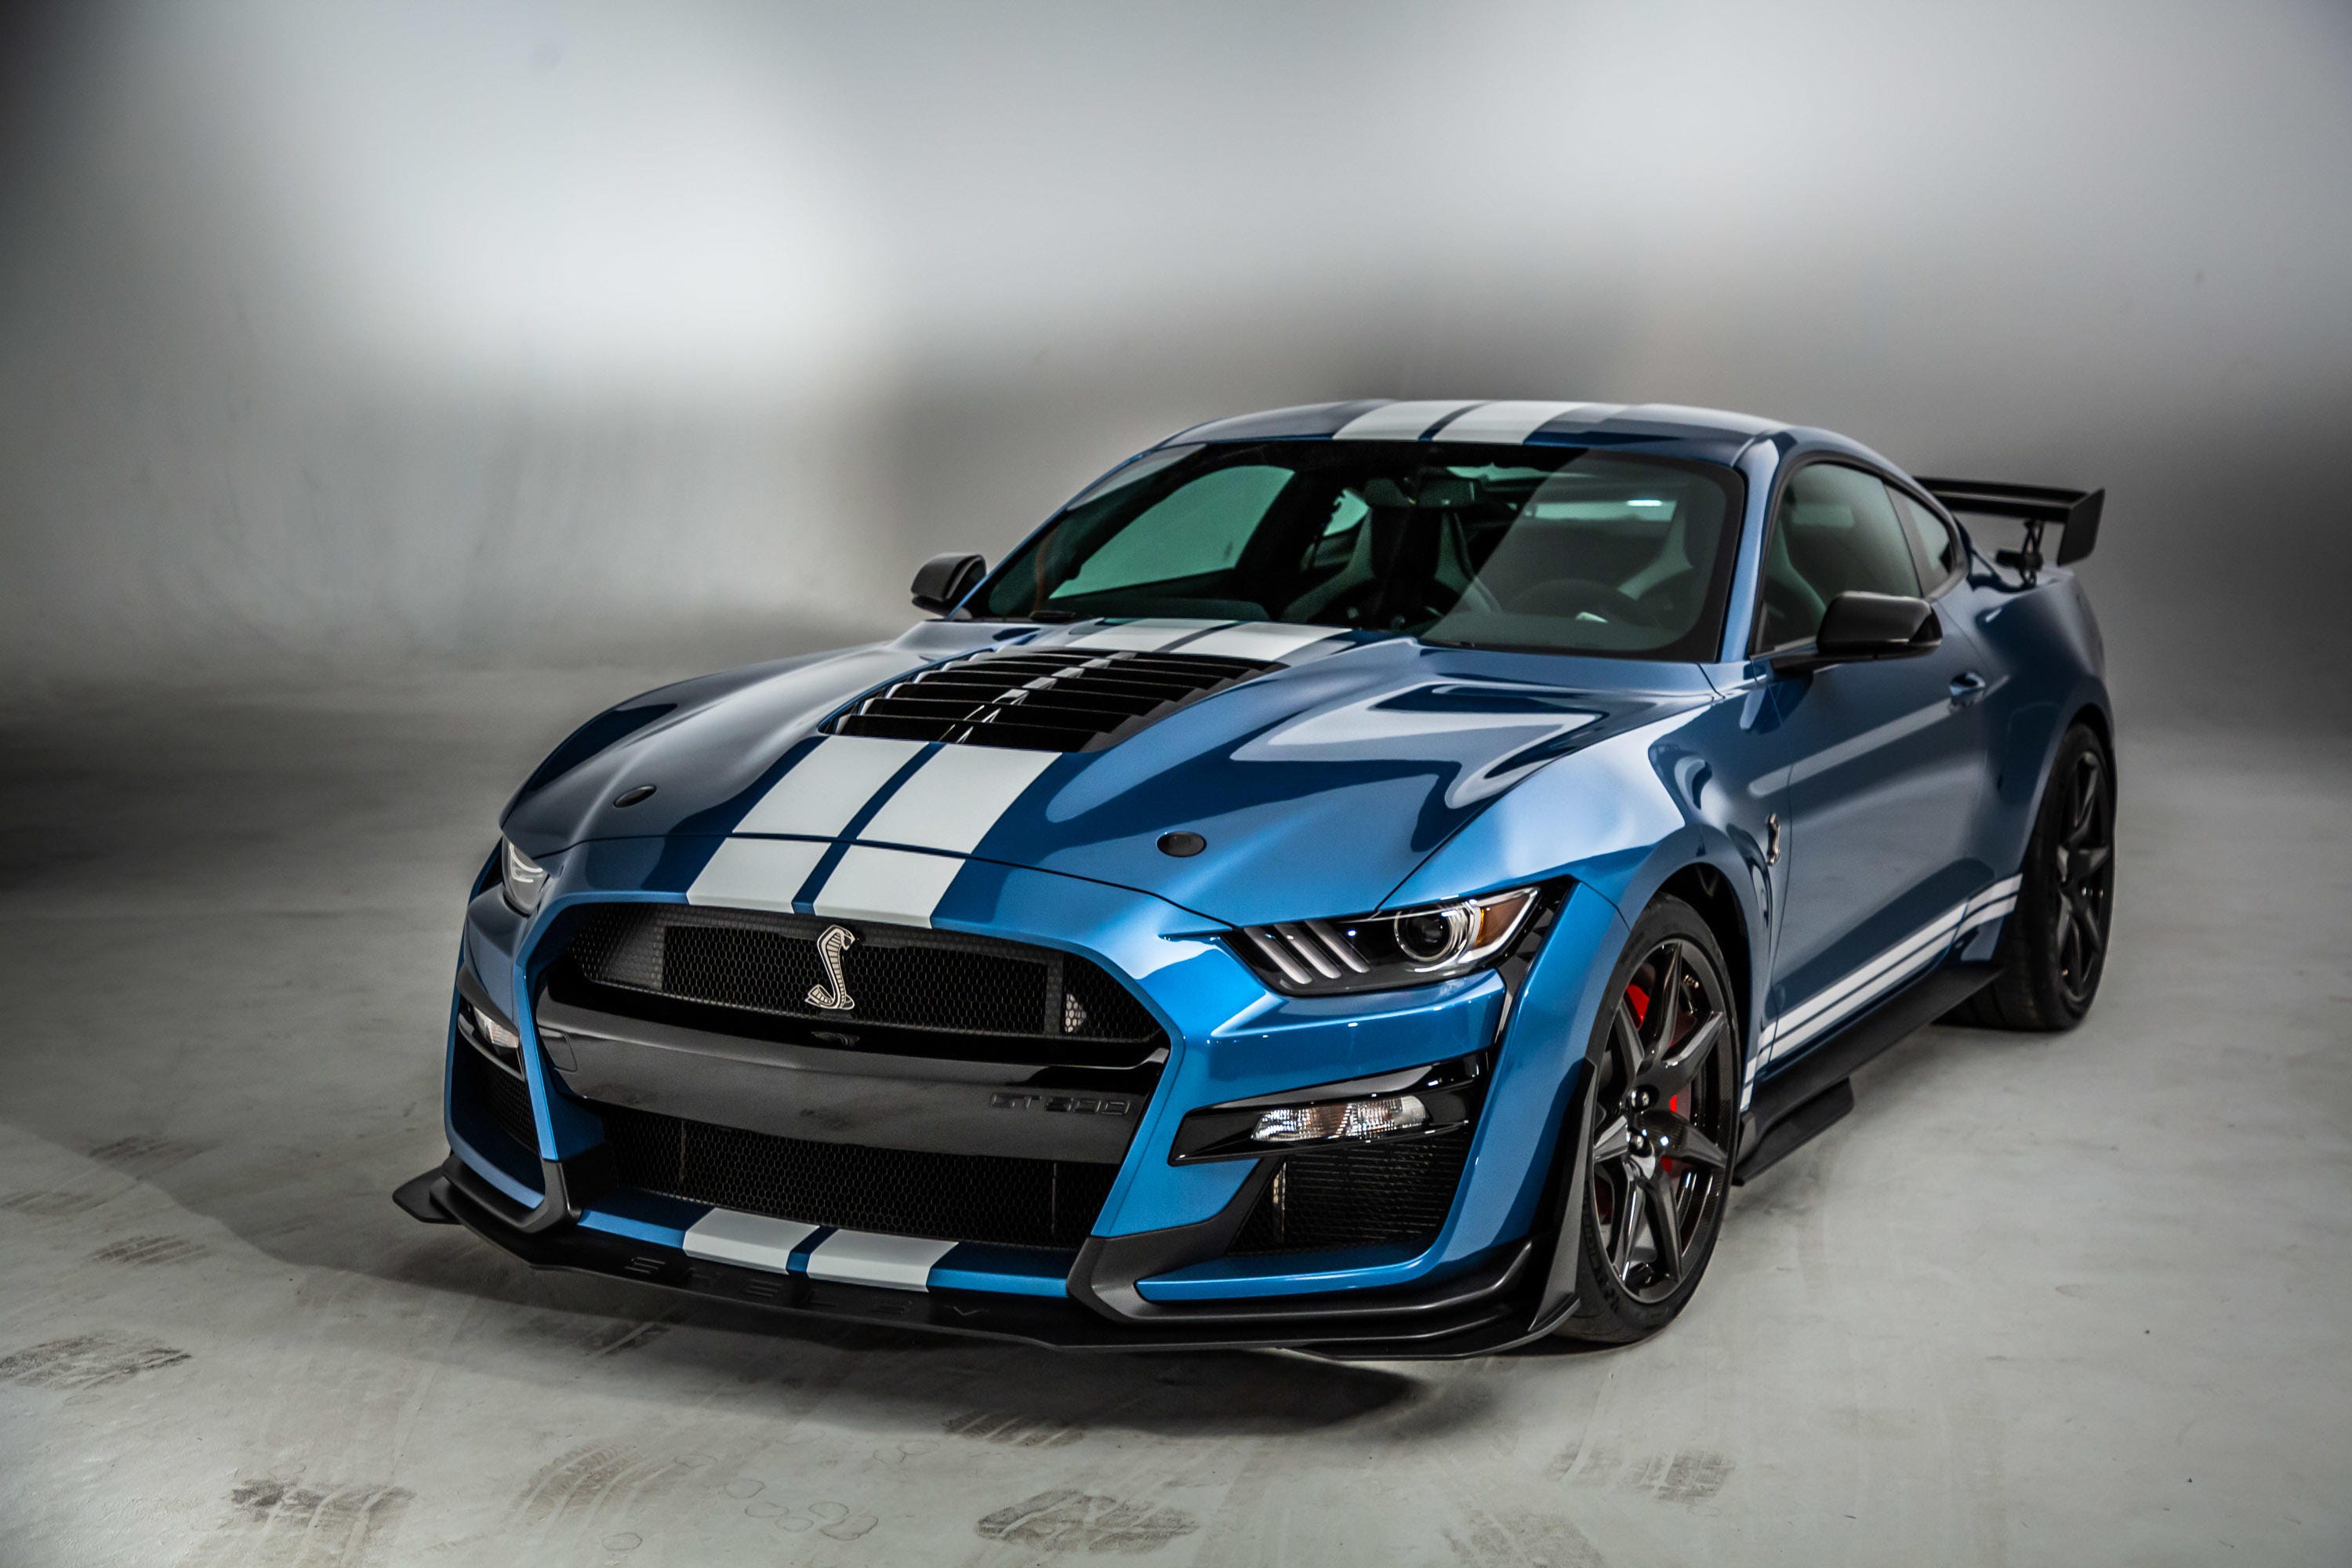 2020 Ford Mustang Shelby GT500 is a 700+ hp assassin - Video - CNET